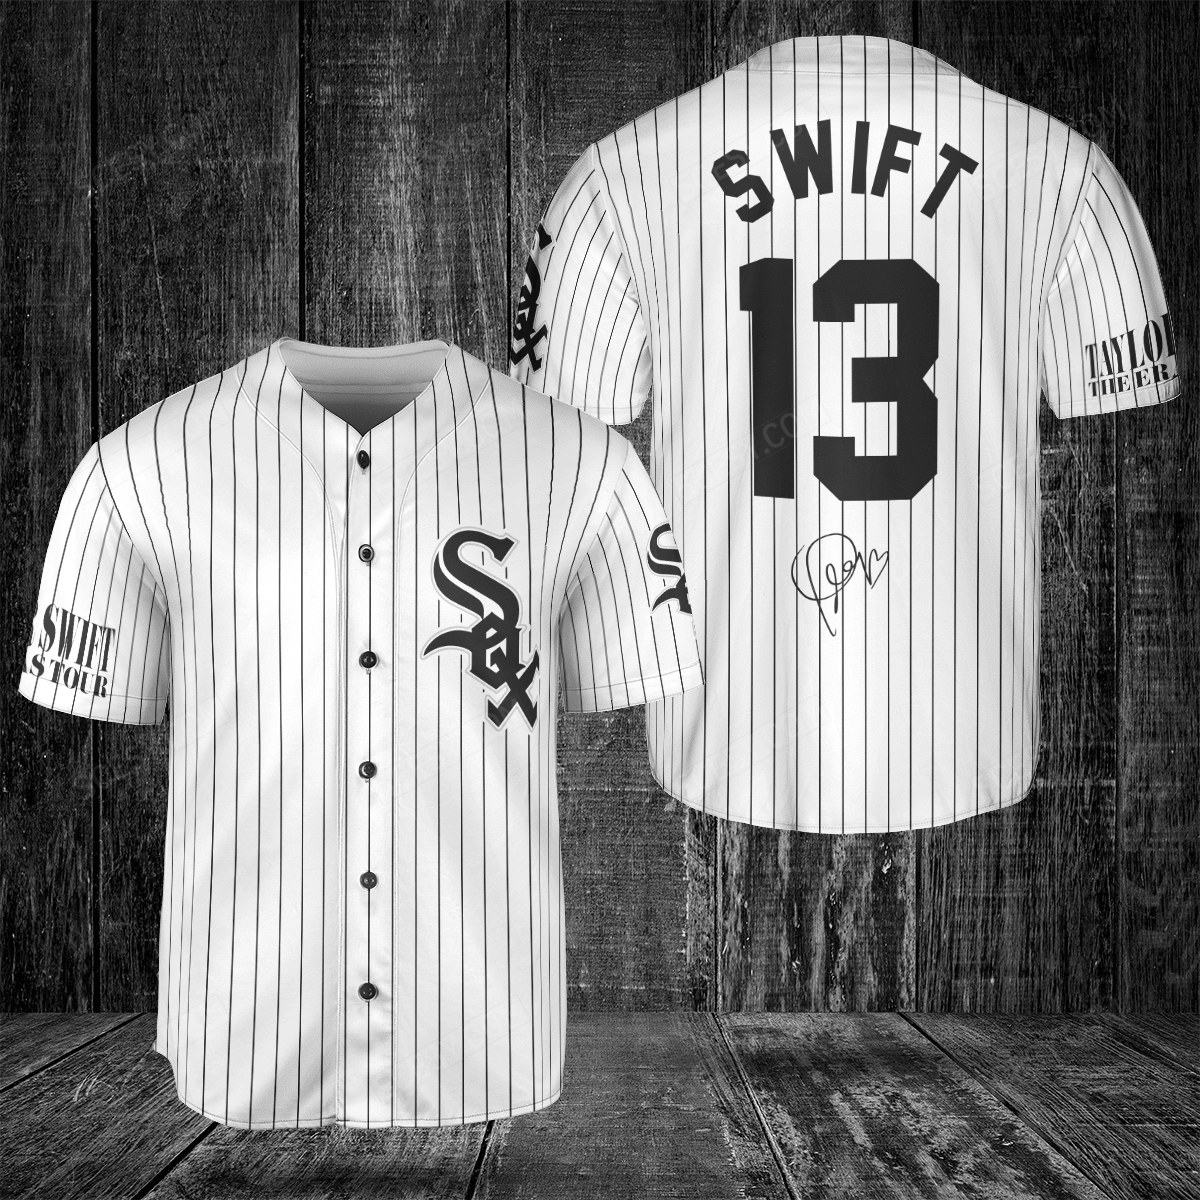 Taylor Swift x Chicago White Sox Jersey - Scesy